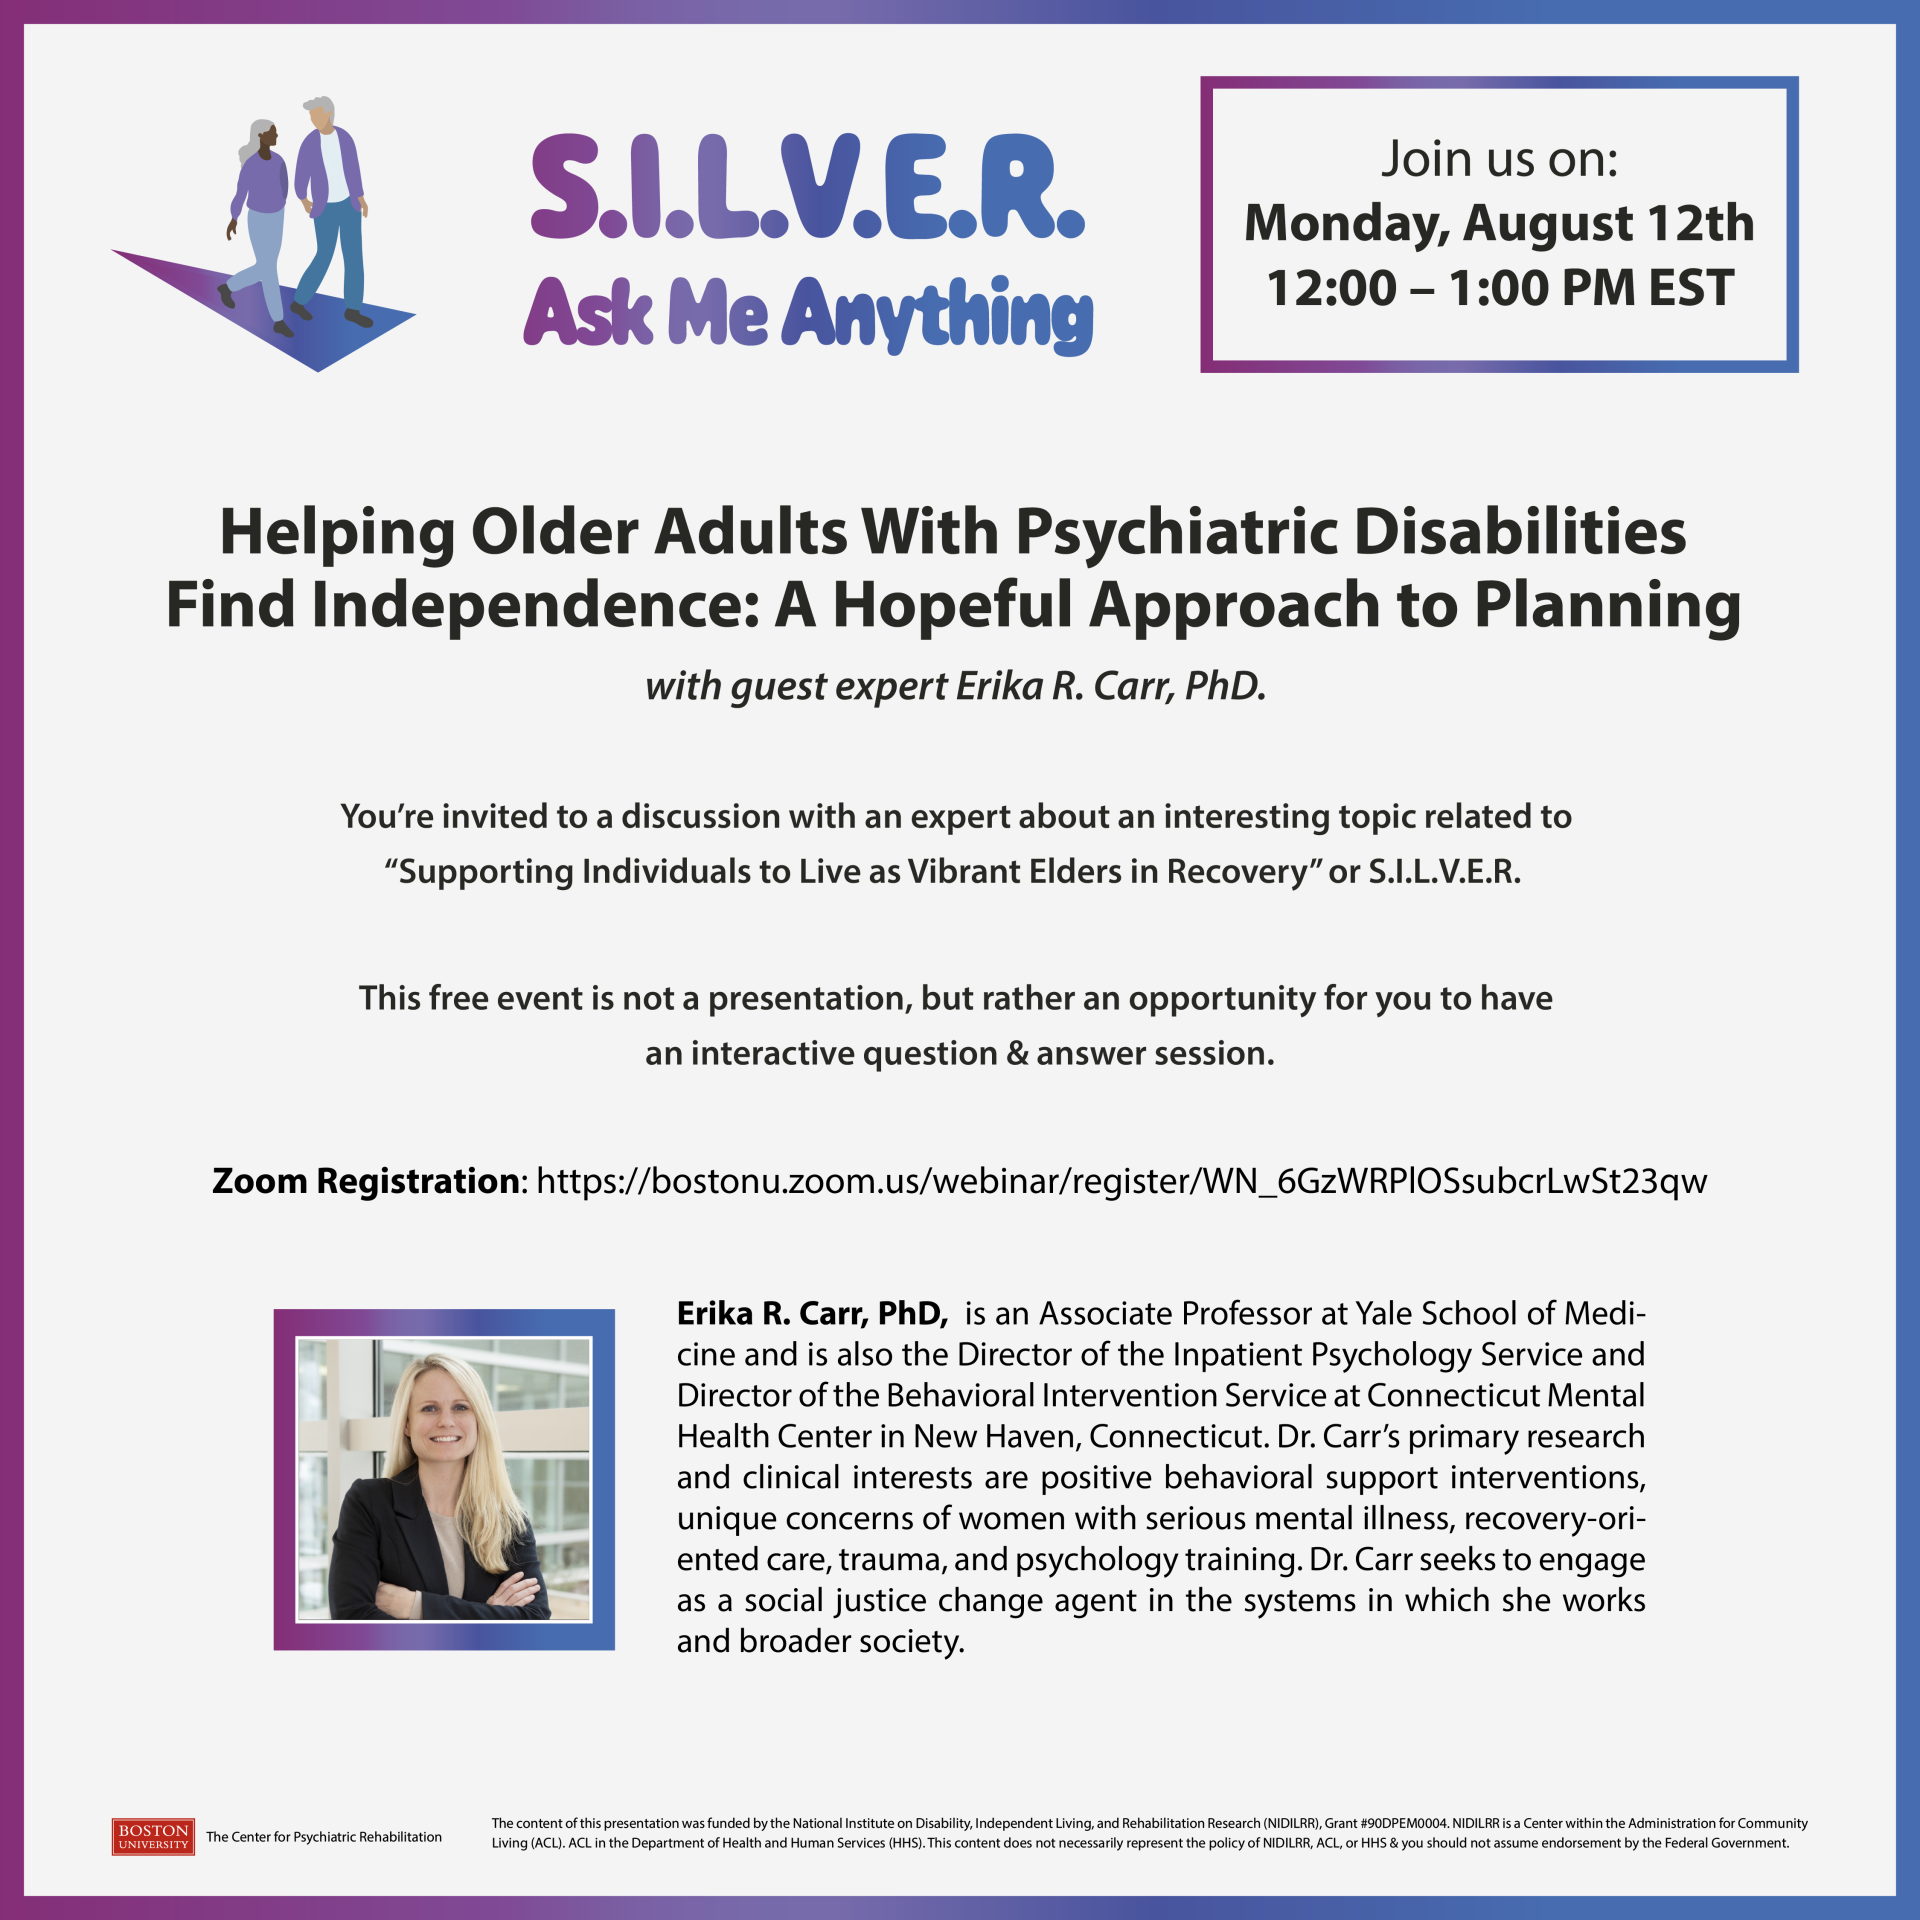 You’re invited to a discussion with an expert about an interesting topic related to “Supporting Individuals to Live as Vibrant Elders in Recovery” or S.I.L.V.E.R. This free event is not a presentation, but rather an opportunity for you to have an interactive question & answer session. Erika R. Carr, PhD, is an Associate Professor at Yale School of Medicine and is also the Director of the Inpatient Psychology Service and Director of the Behavioral Intervention Service at Connecticut Mental Health Center in New Haven, Connecticut. Dr. Carr’s primary research and clinical interests are positive behavioral support interventions, unique concerns of women with serious mental illness, recovery-oriented care, trauma, and psychology training. Dr. Carr seeks to engage as a social justice change agent in the systems in which she works and broader society. Submit webinar questions before the webinar to: Lisa Krystynak at lisakaye@bu.edu Boston University provides reasonable accommodation upon request. Please send an email to lisakaye@bu.edu at least 14 days prior to the event with the specific accommodations you require. If less than 14 days remain until the event, please submit your request the same day you register, or as soon as possible, so we can make every effort to accommodate you. Registration Link: https://bostonu.zoom.us/webinar/register/WN_6GzWRPlOSsubcrLwSt23qw